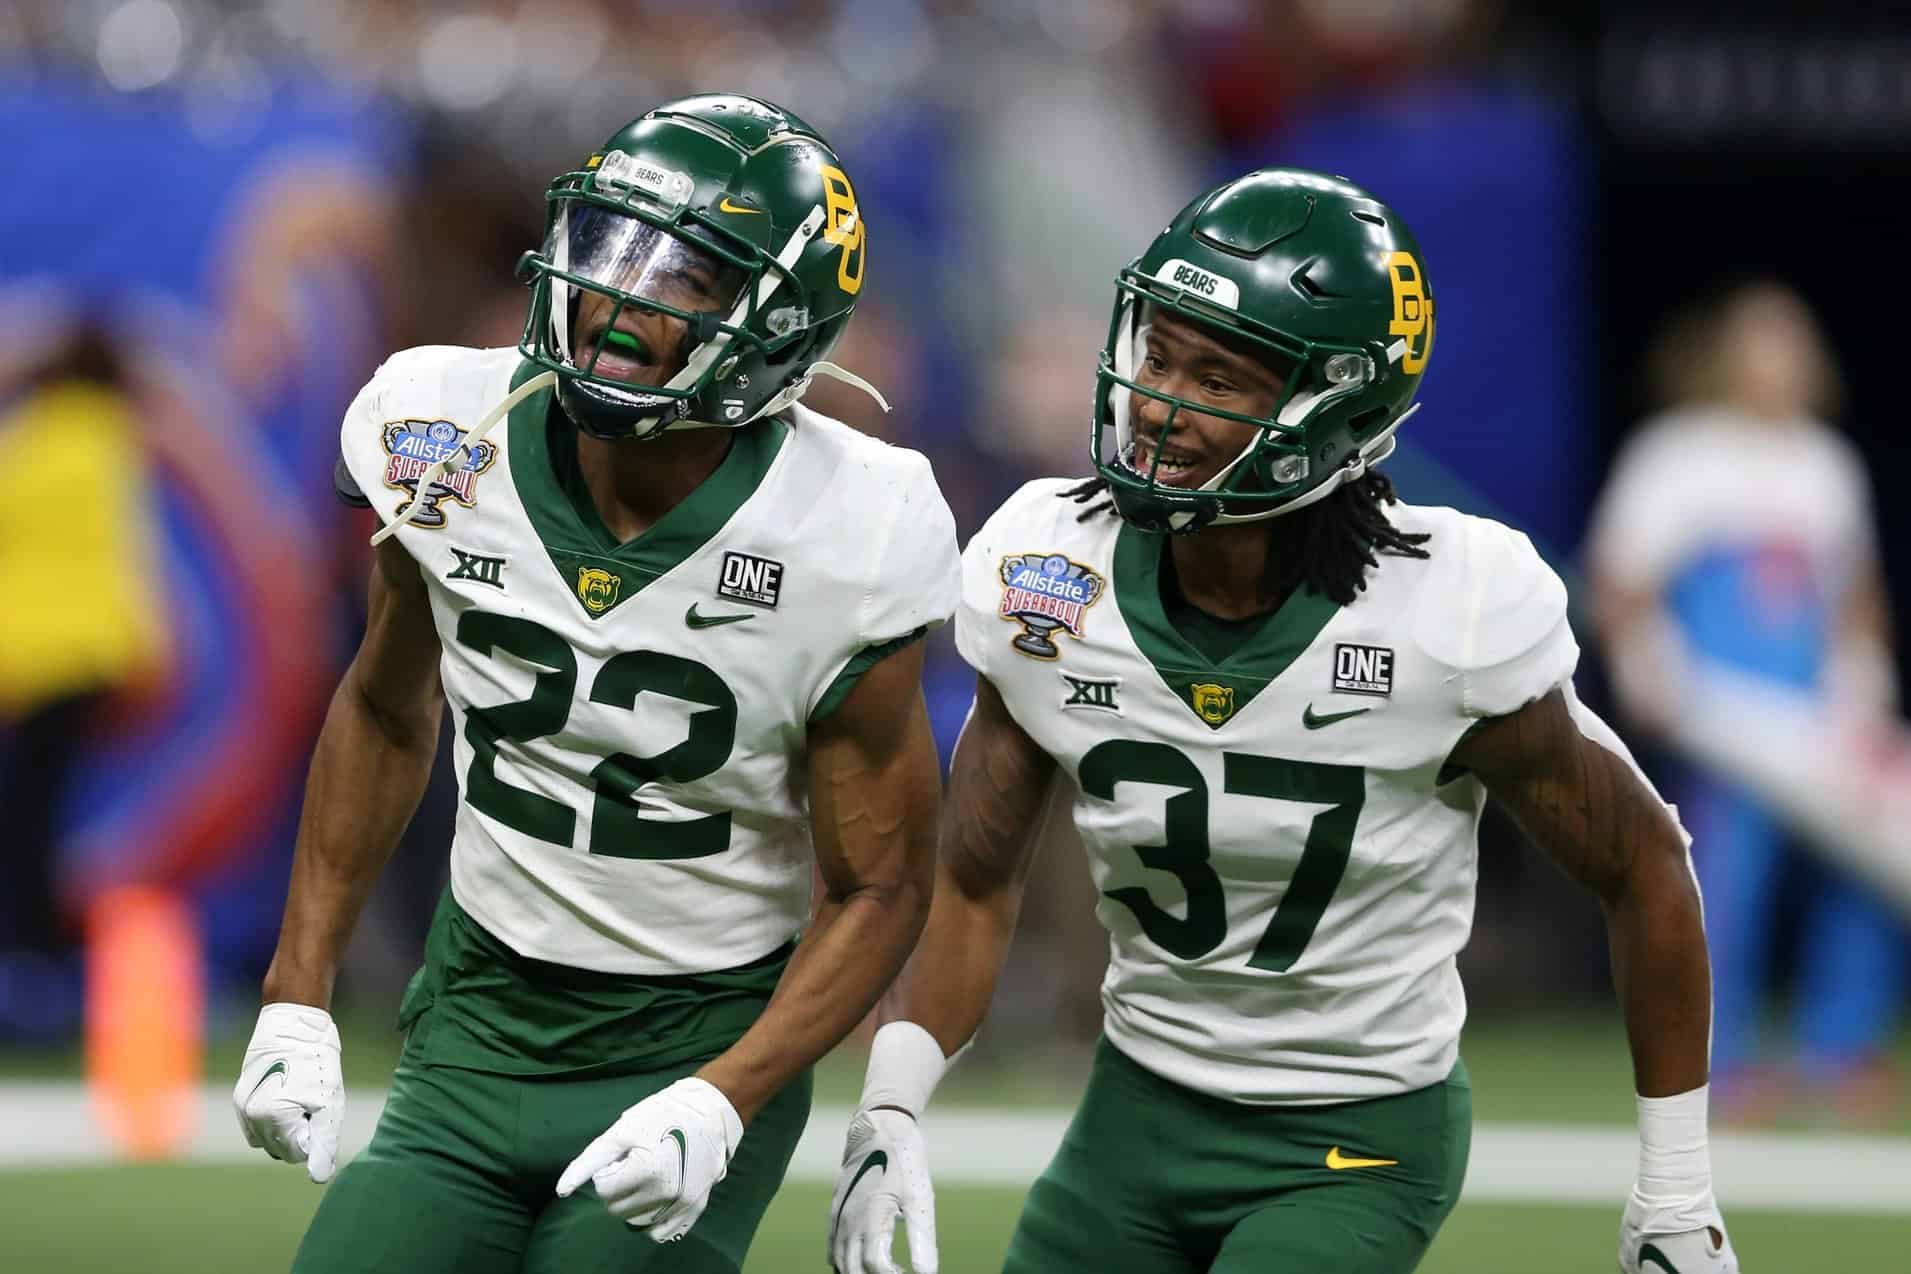 Baylor 2022 NFL Draft Scouting Reports include JT Woods and Jalen